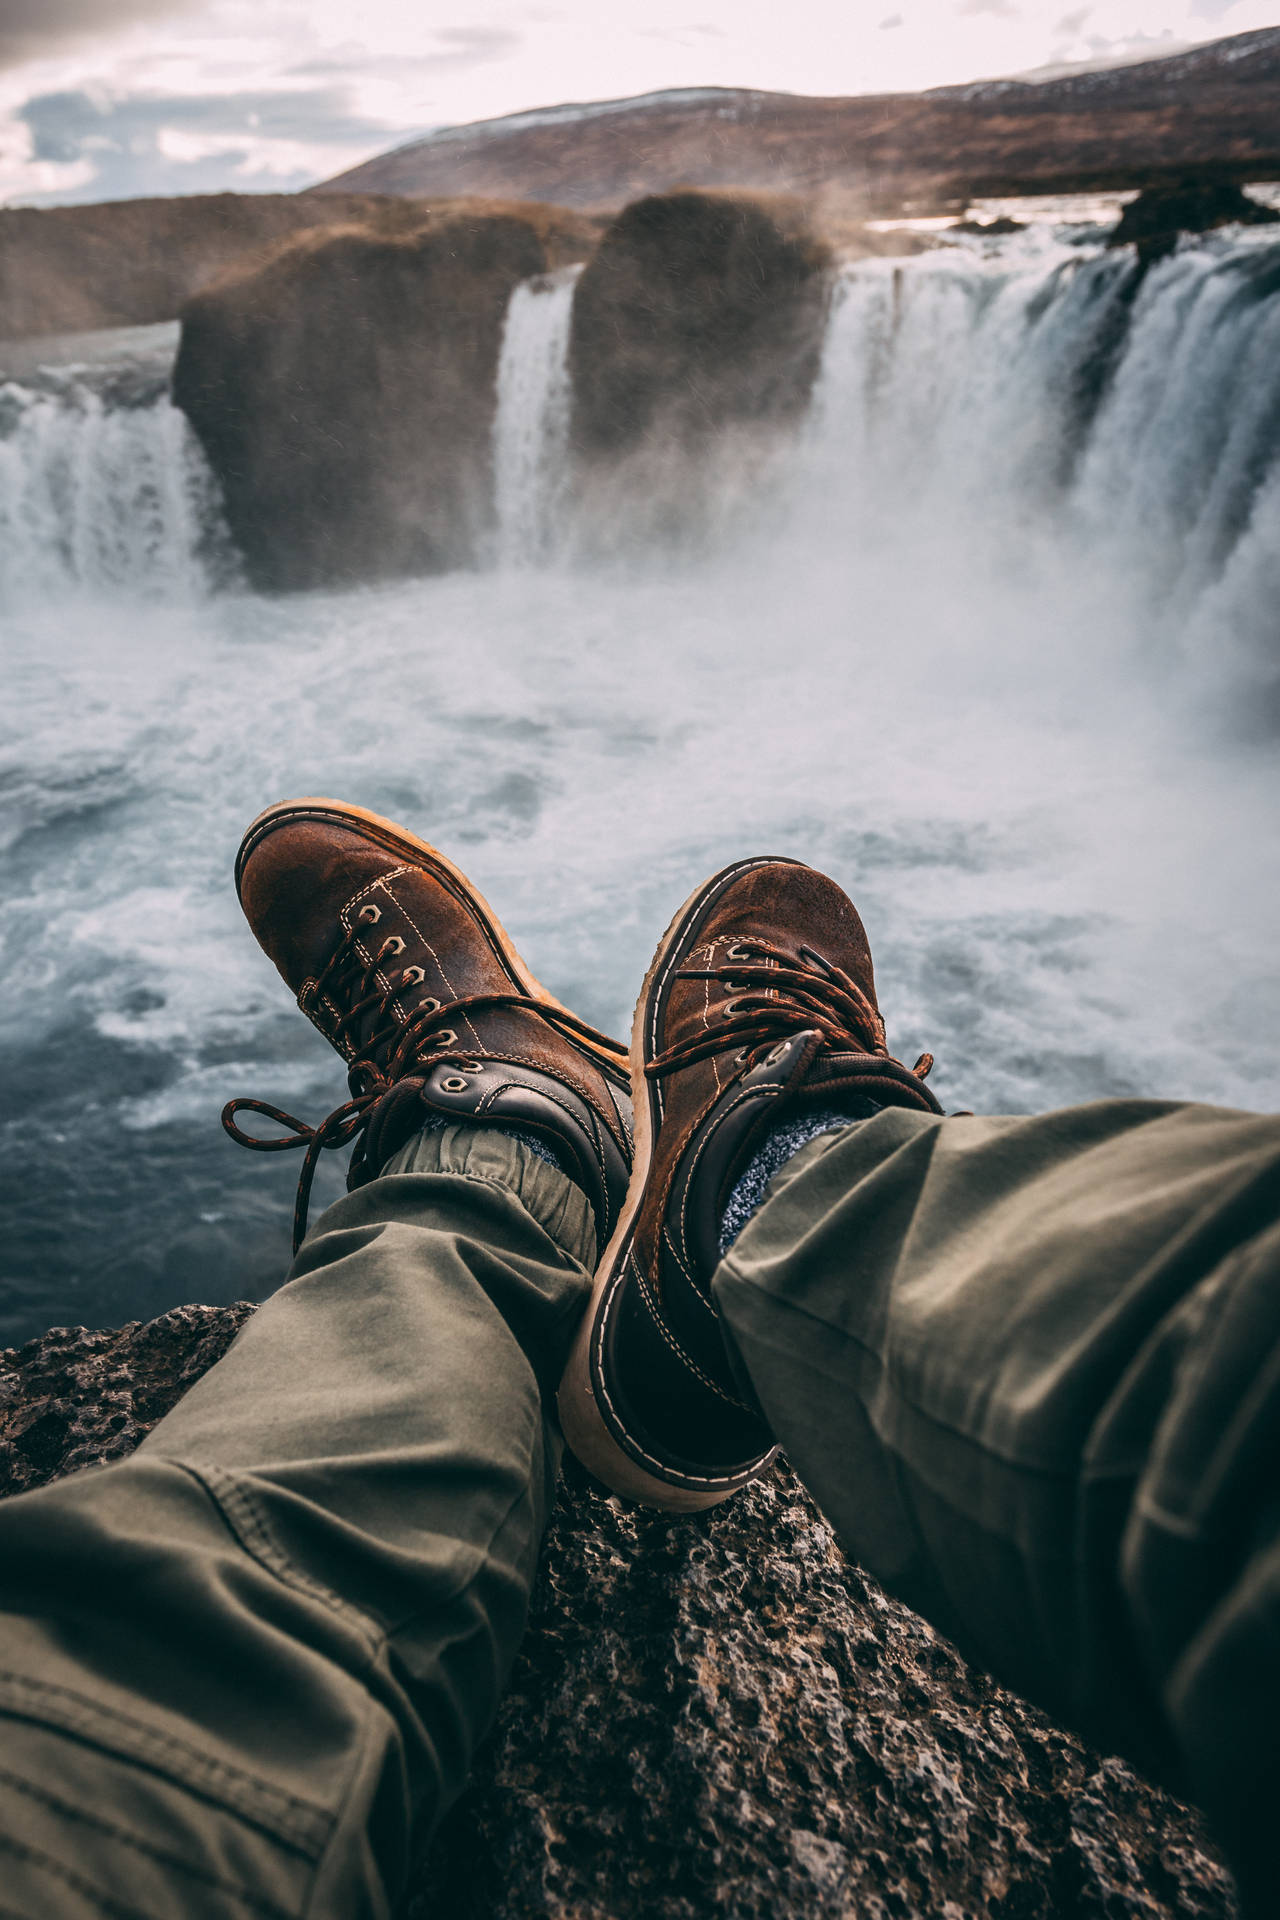 Shoes By A Waterfall Wallpaper